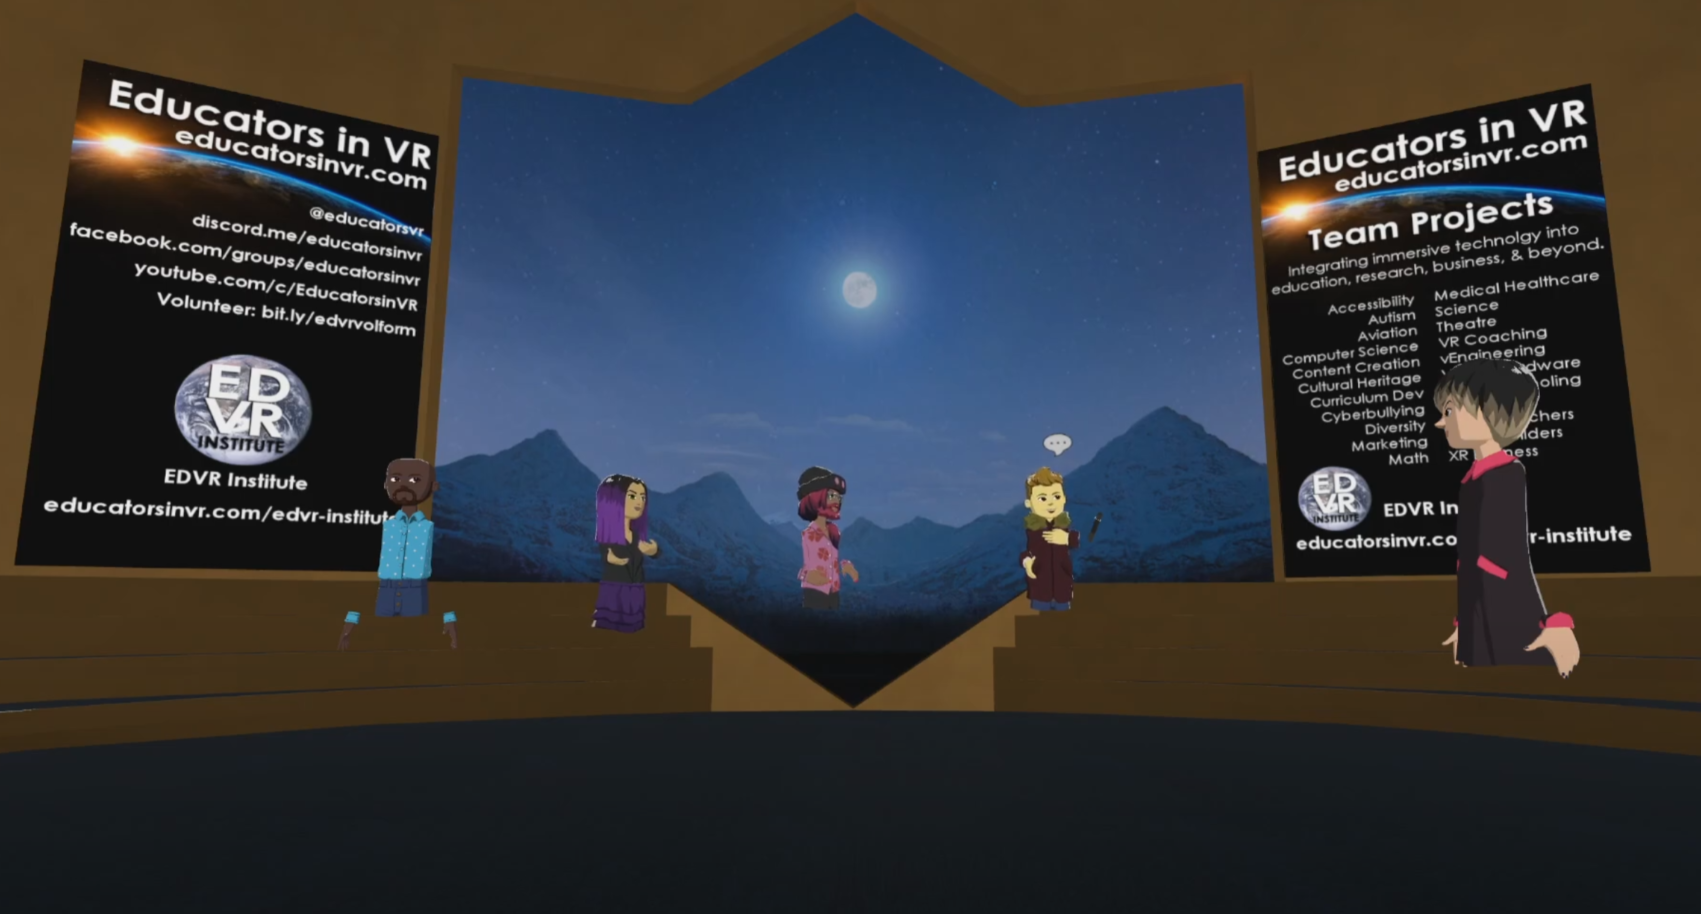 Educators in VR: Game-based Learning & Extended Reality